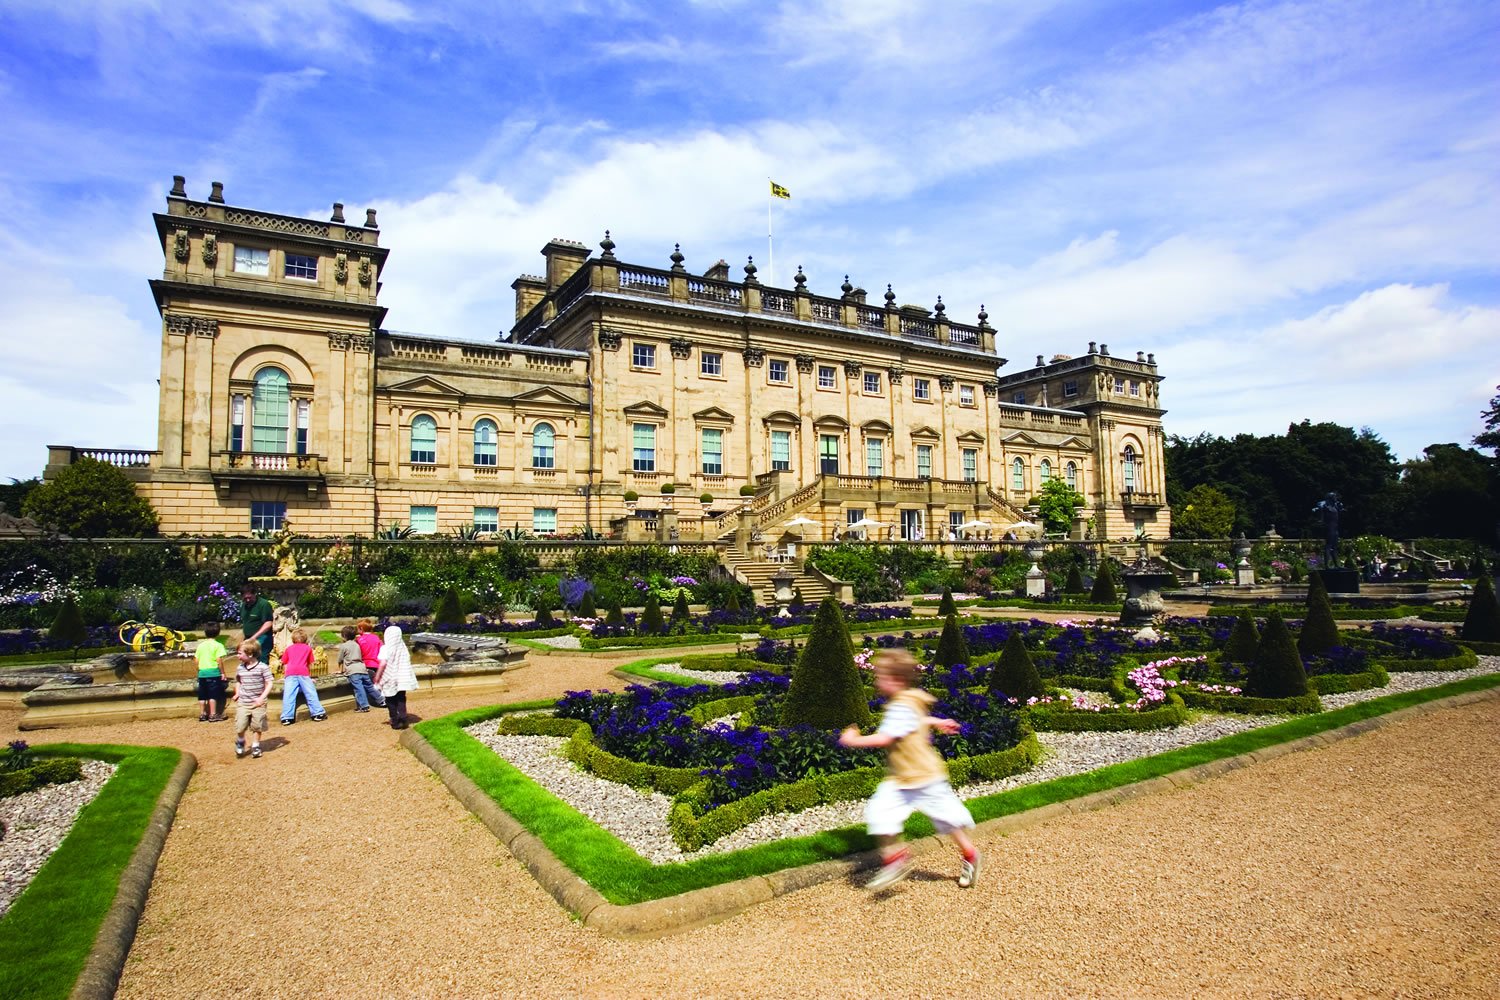 Children playing outside Harewood House